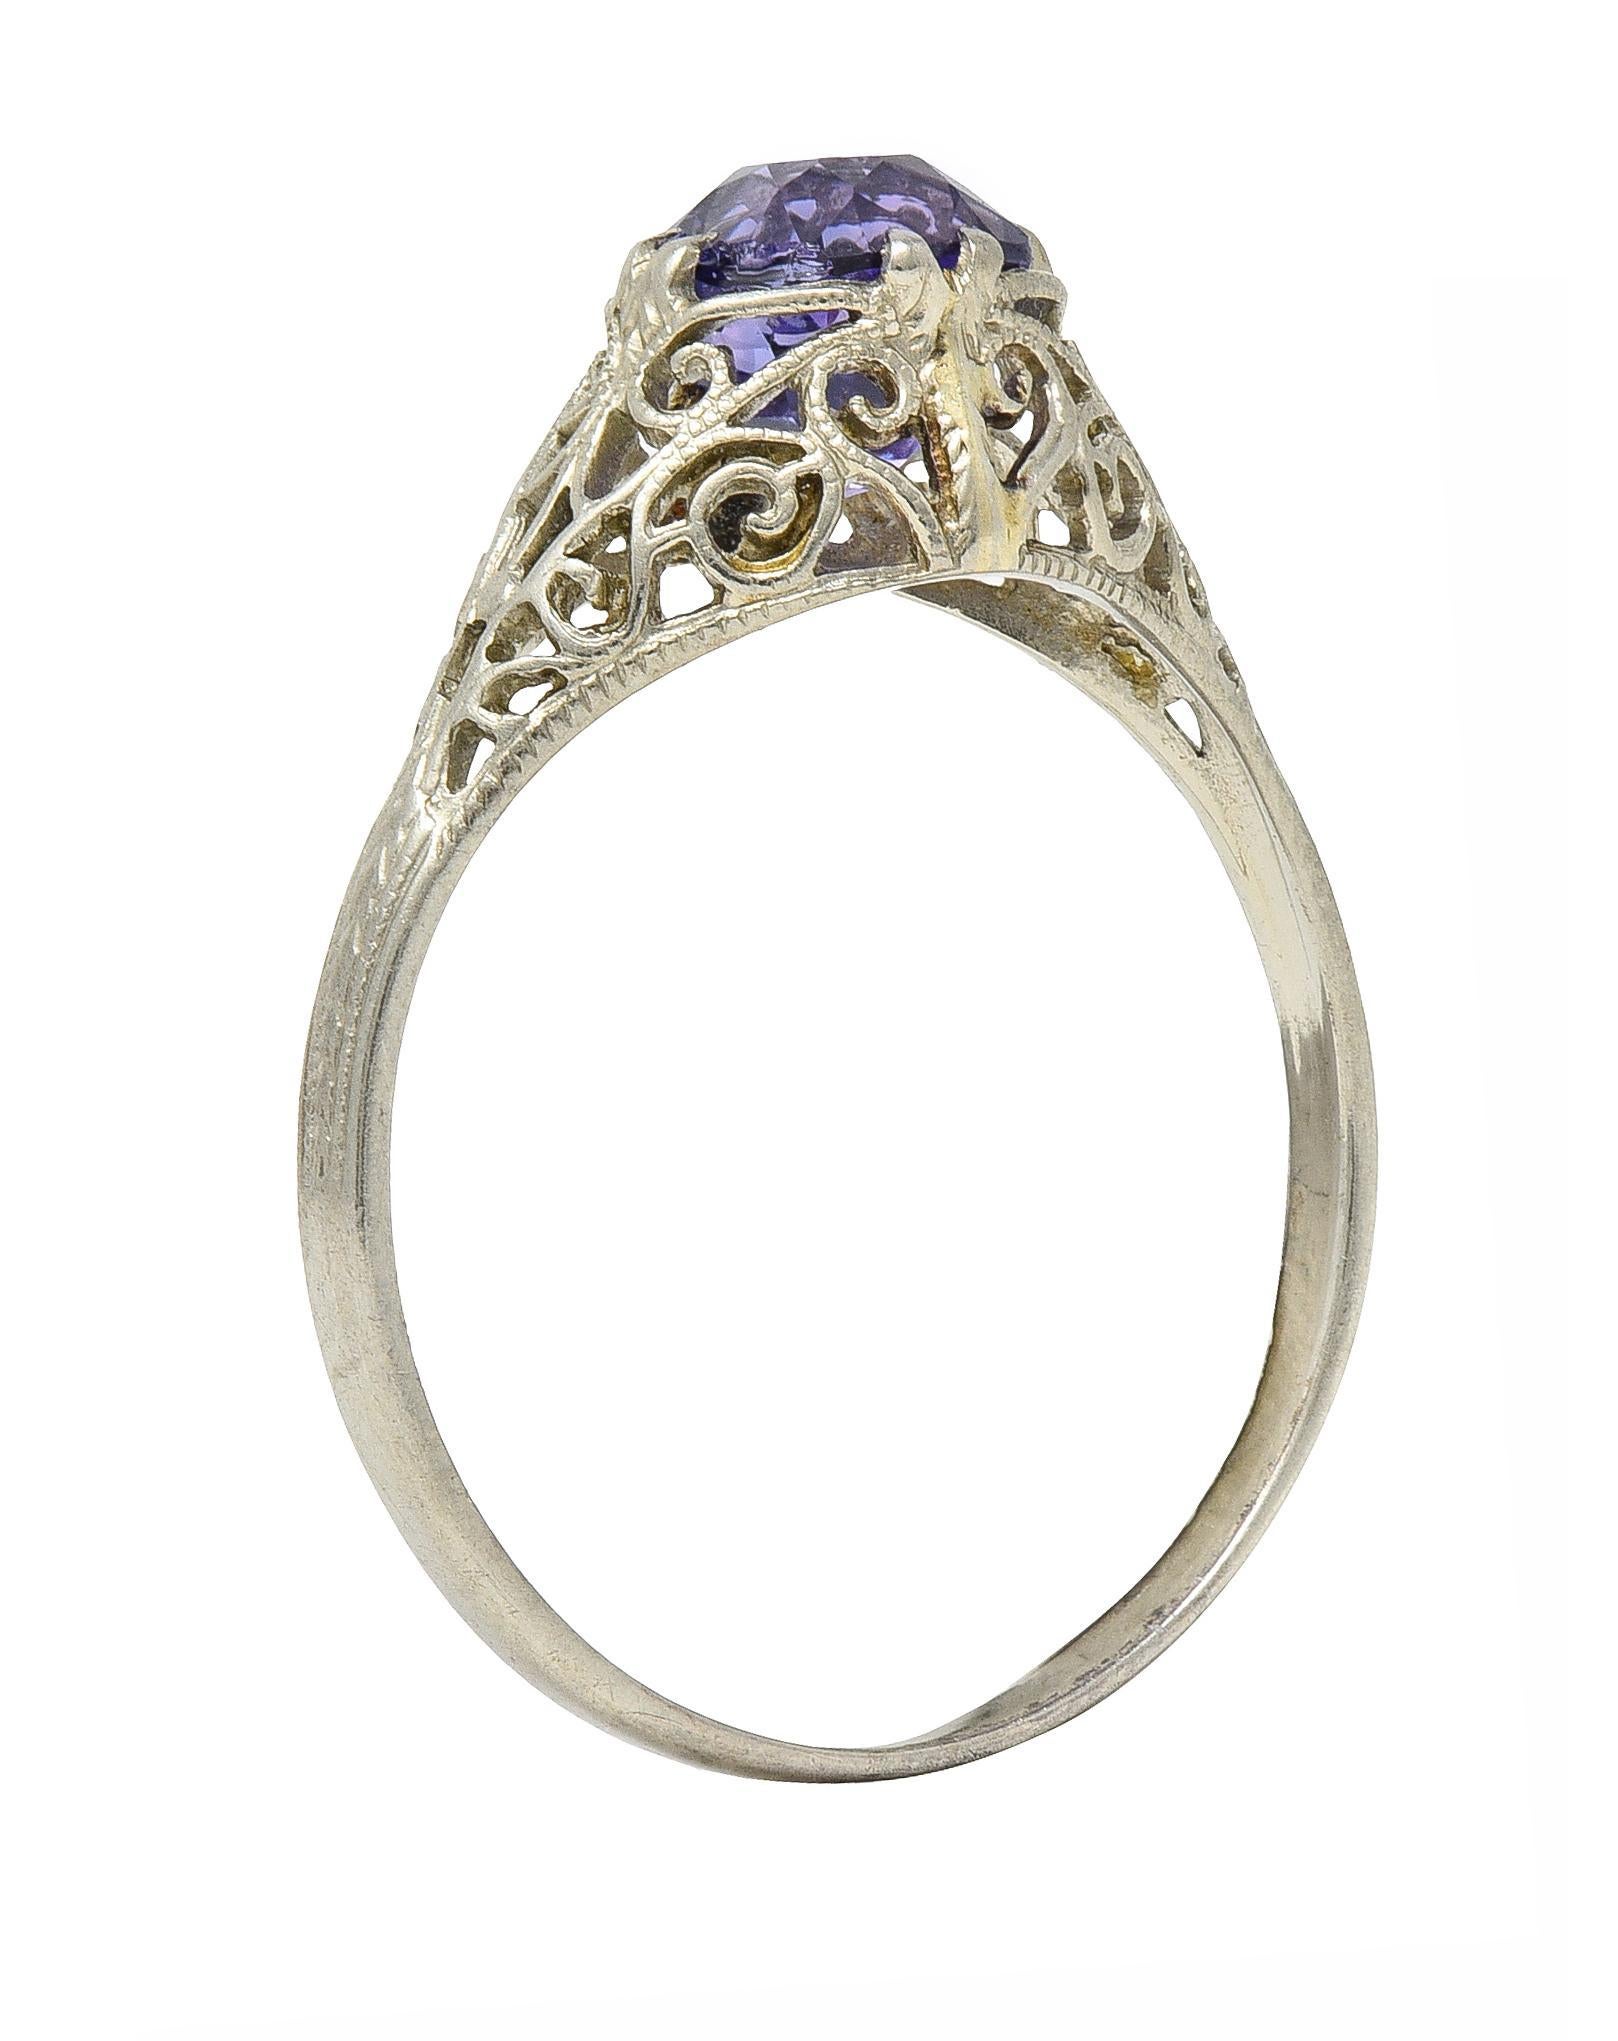 Centering a cushion cut sapphire weighing 1.48 carats - transparent medium purple in color 
Natural Sri Lankan in origin with no indications of heat treatment 
Set with split-talon prongs with a pierced miligrain gallery
Featuring scroll and heart